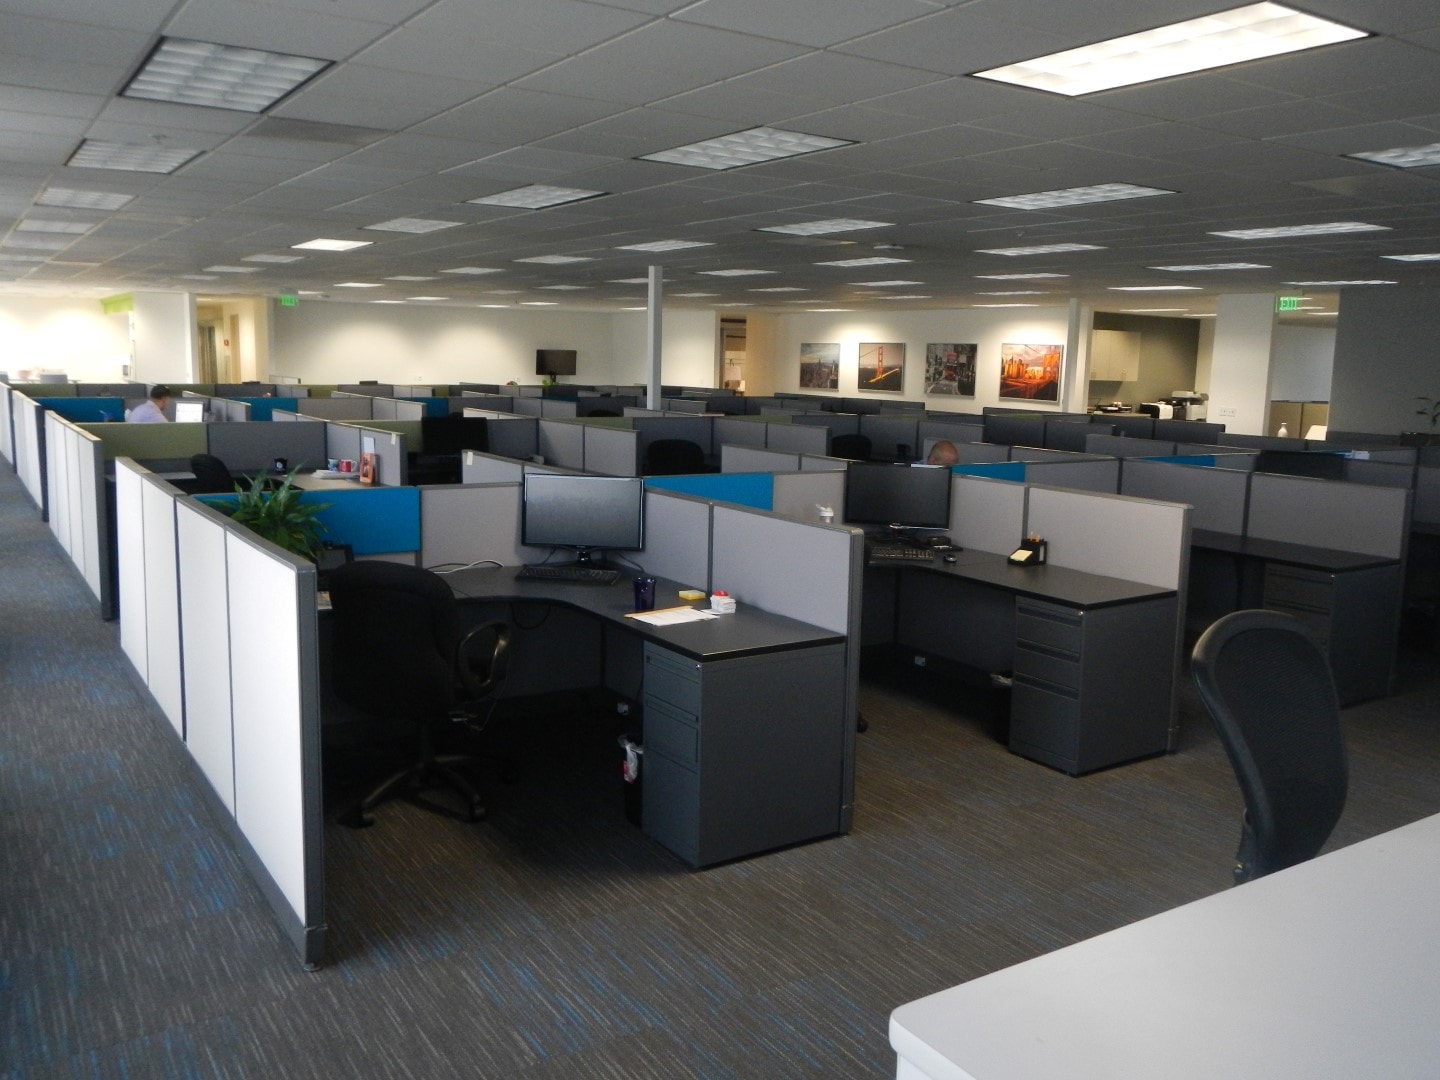 Cubicles in a large room